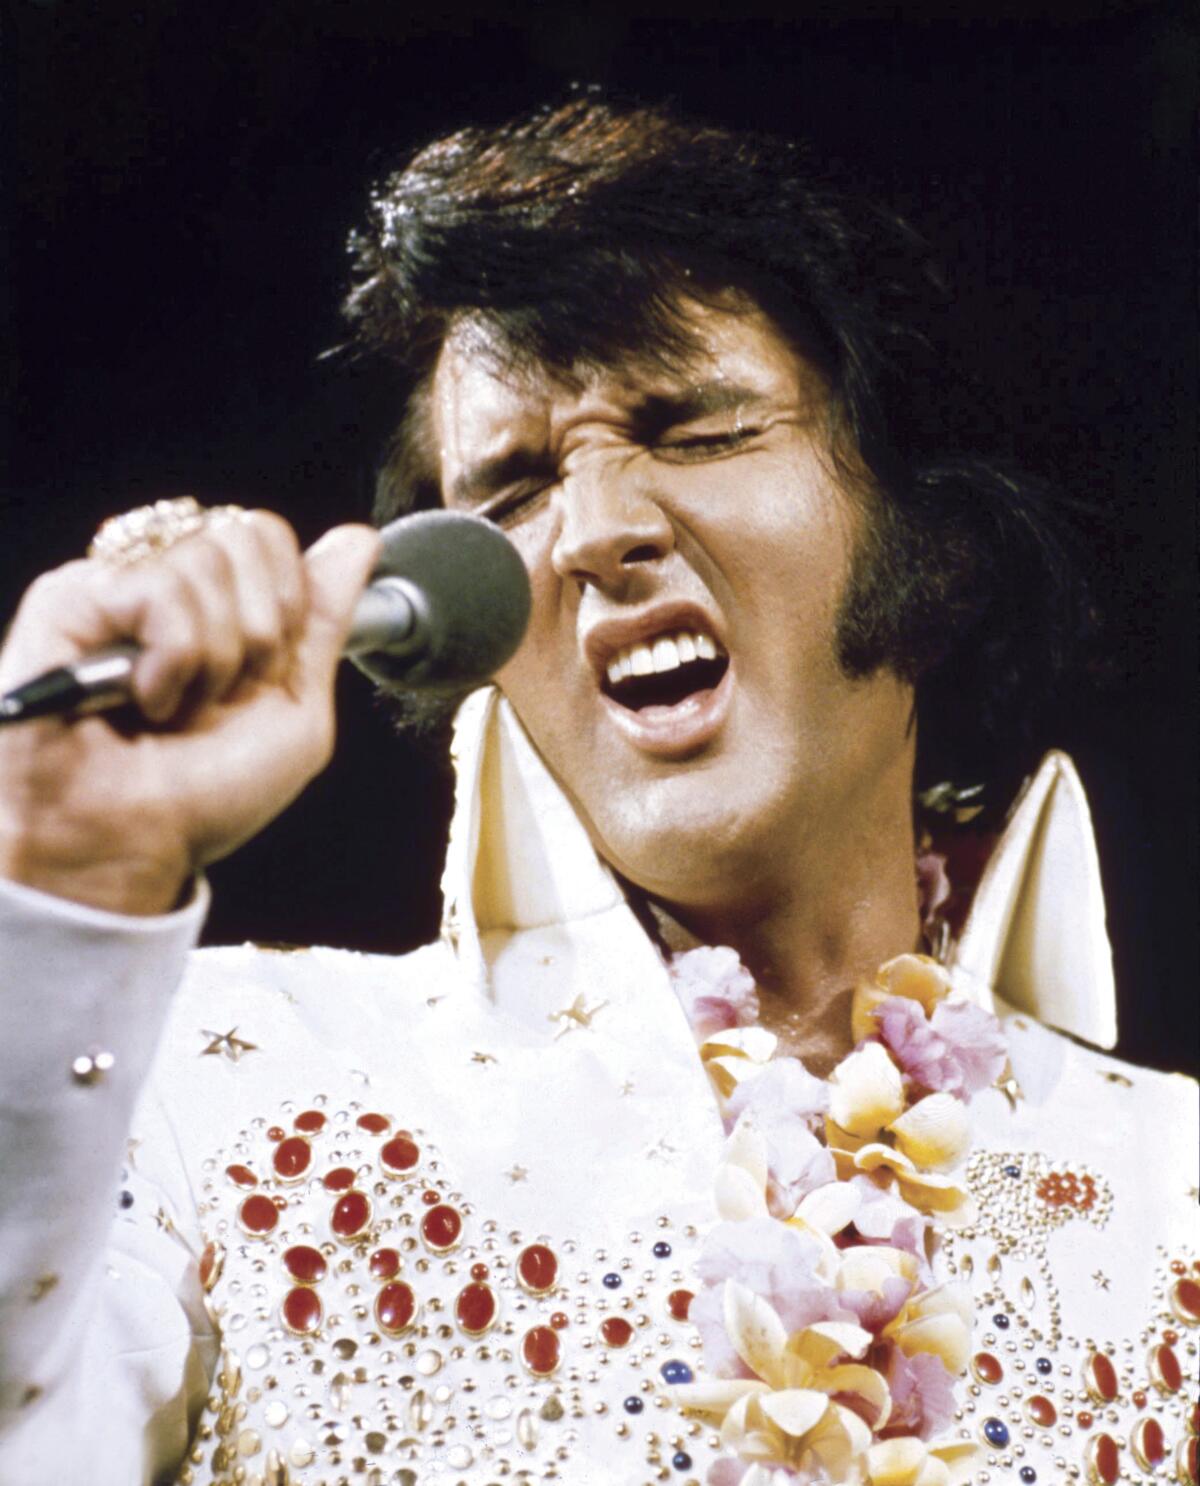 A man in a spangly outfit sings into a microphone.